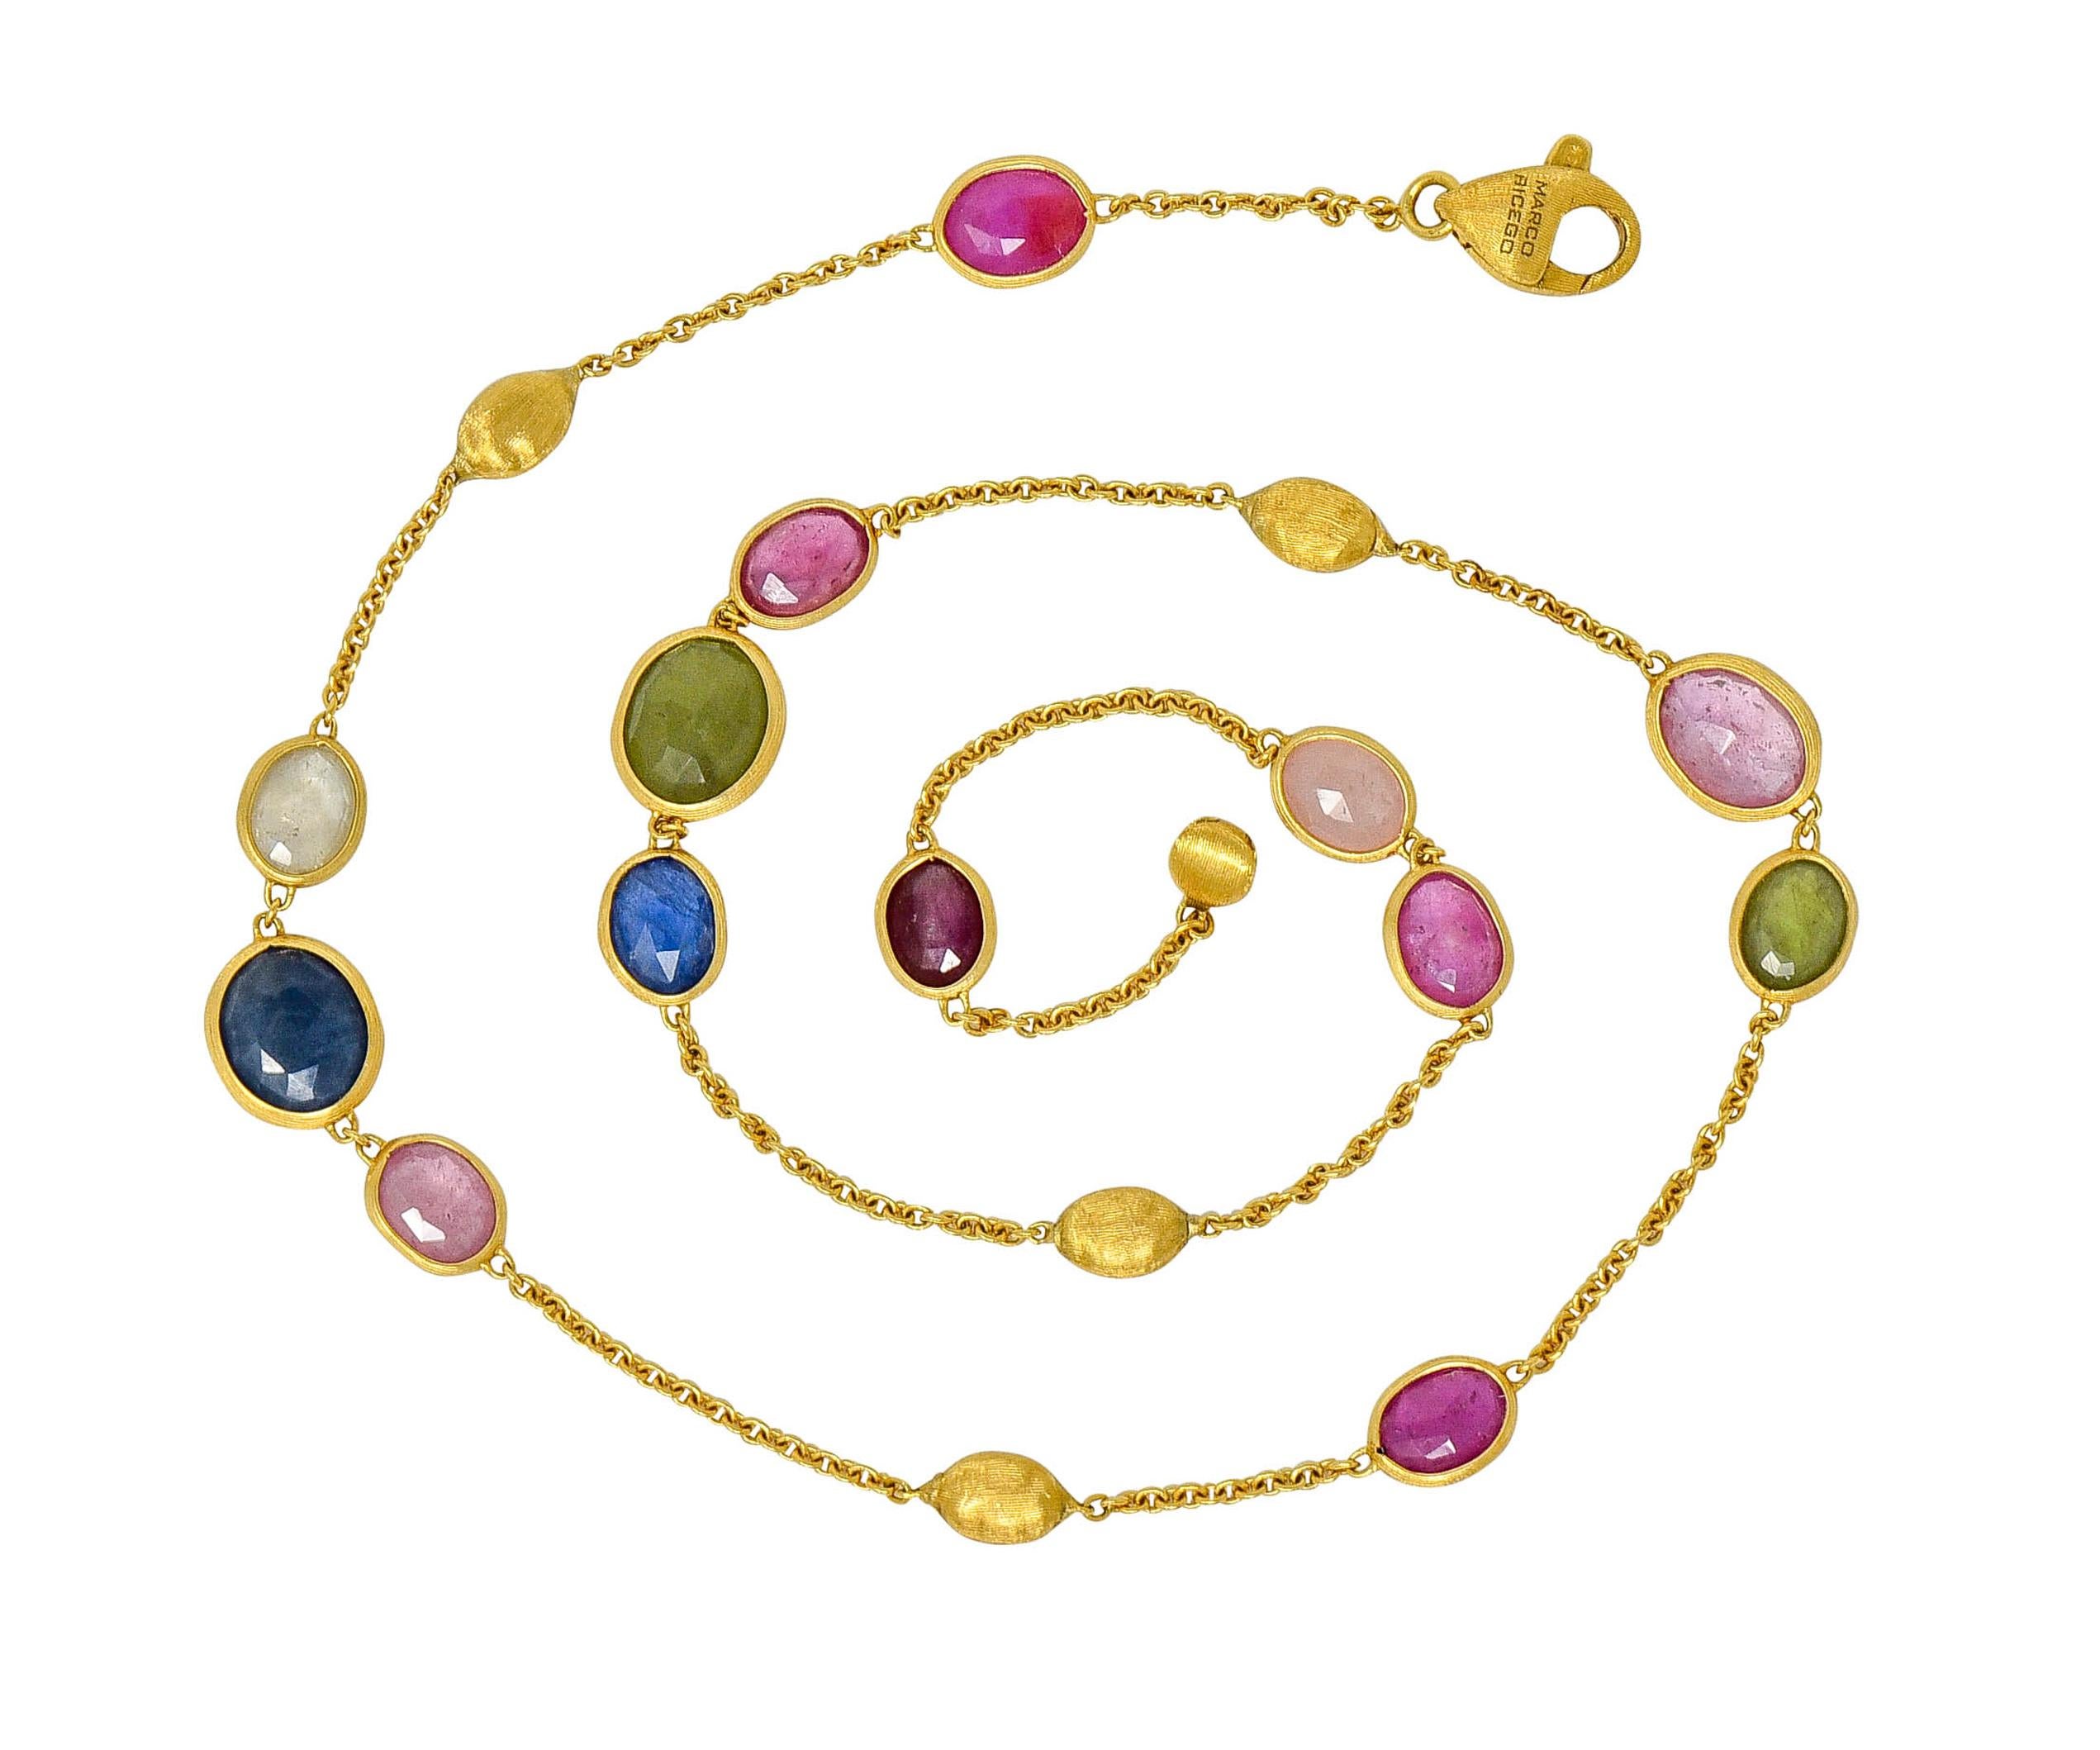 Necklace is designed with brushed gold oval stations alternating with gemstones, bezel set in brushed gold surrounds

Featuring pink, green, blue, and clear sapphire, faceted on both sides, translucent with natural inclusions

Completed by cable